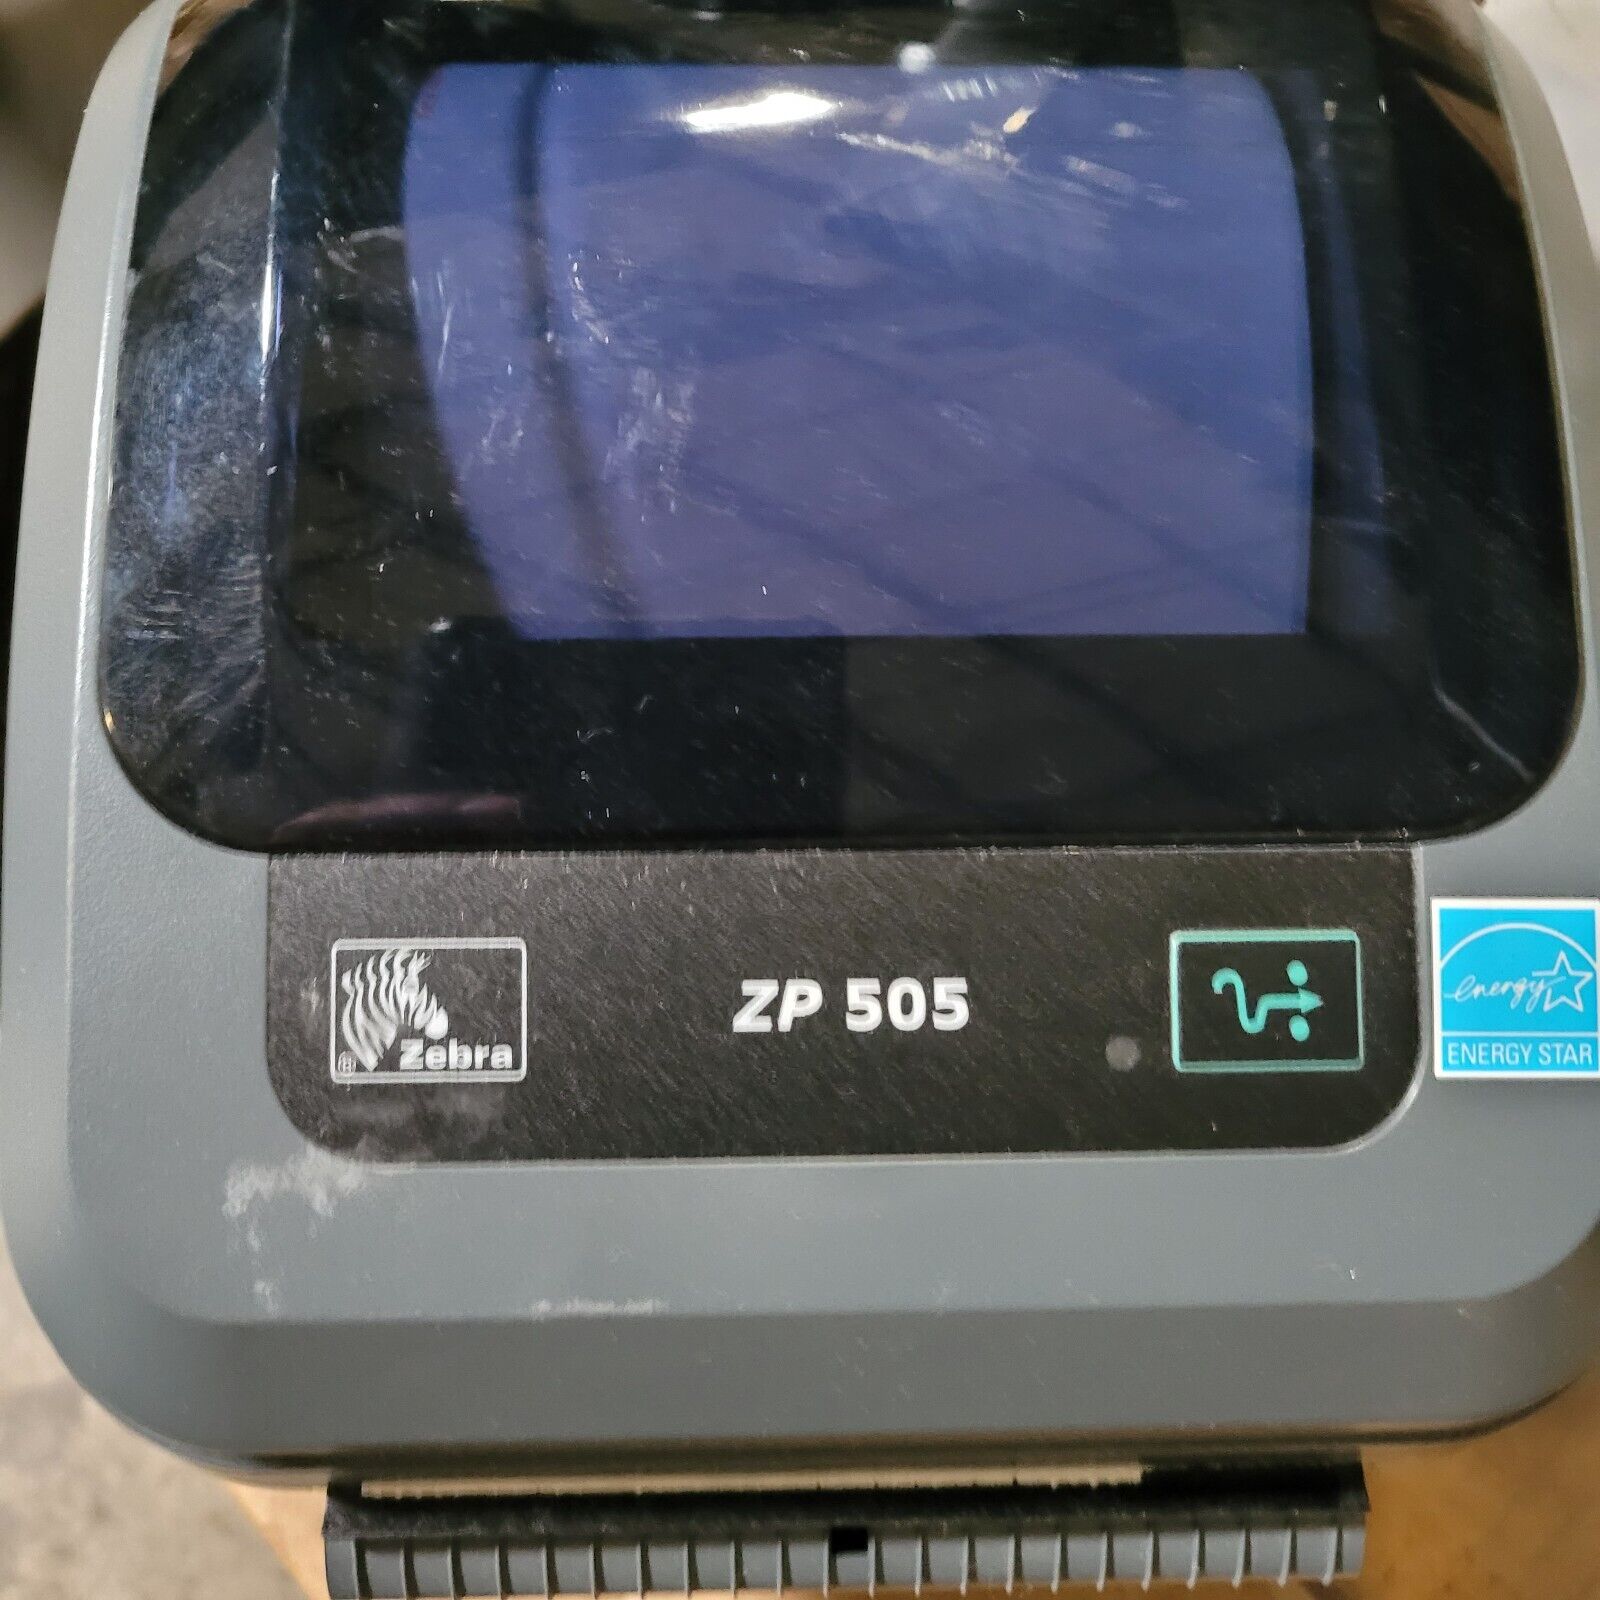 Zebra ZP505 Label Thermal Printer UPS FEDEX GREAT CONDITION -FREE ROLL OF LABELS